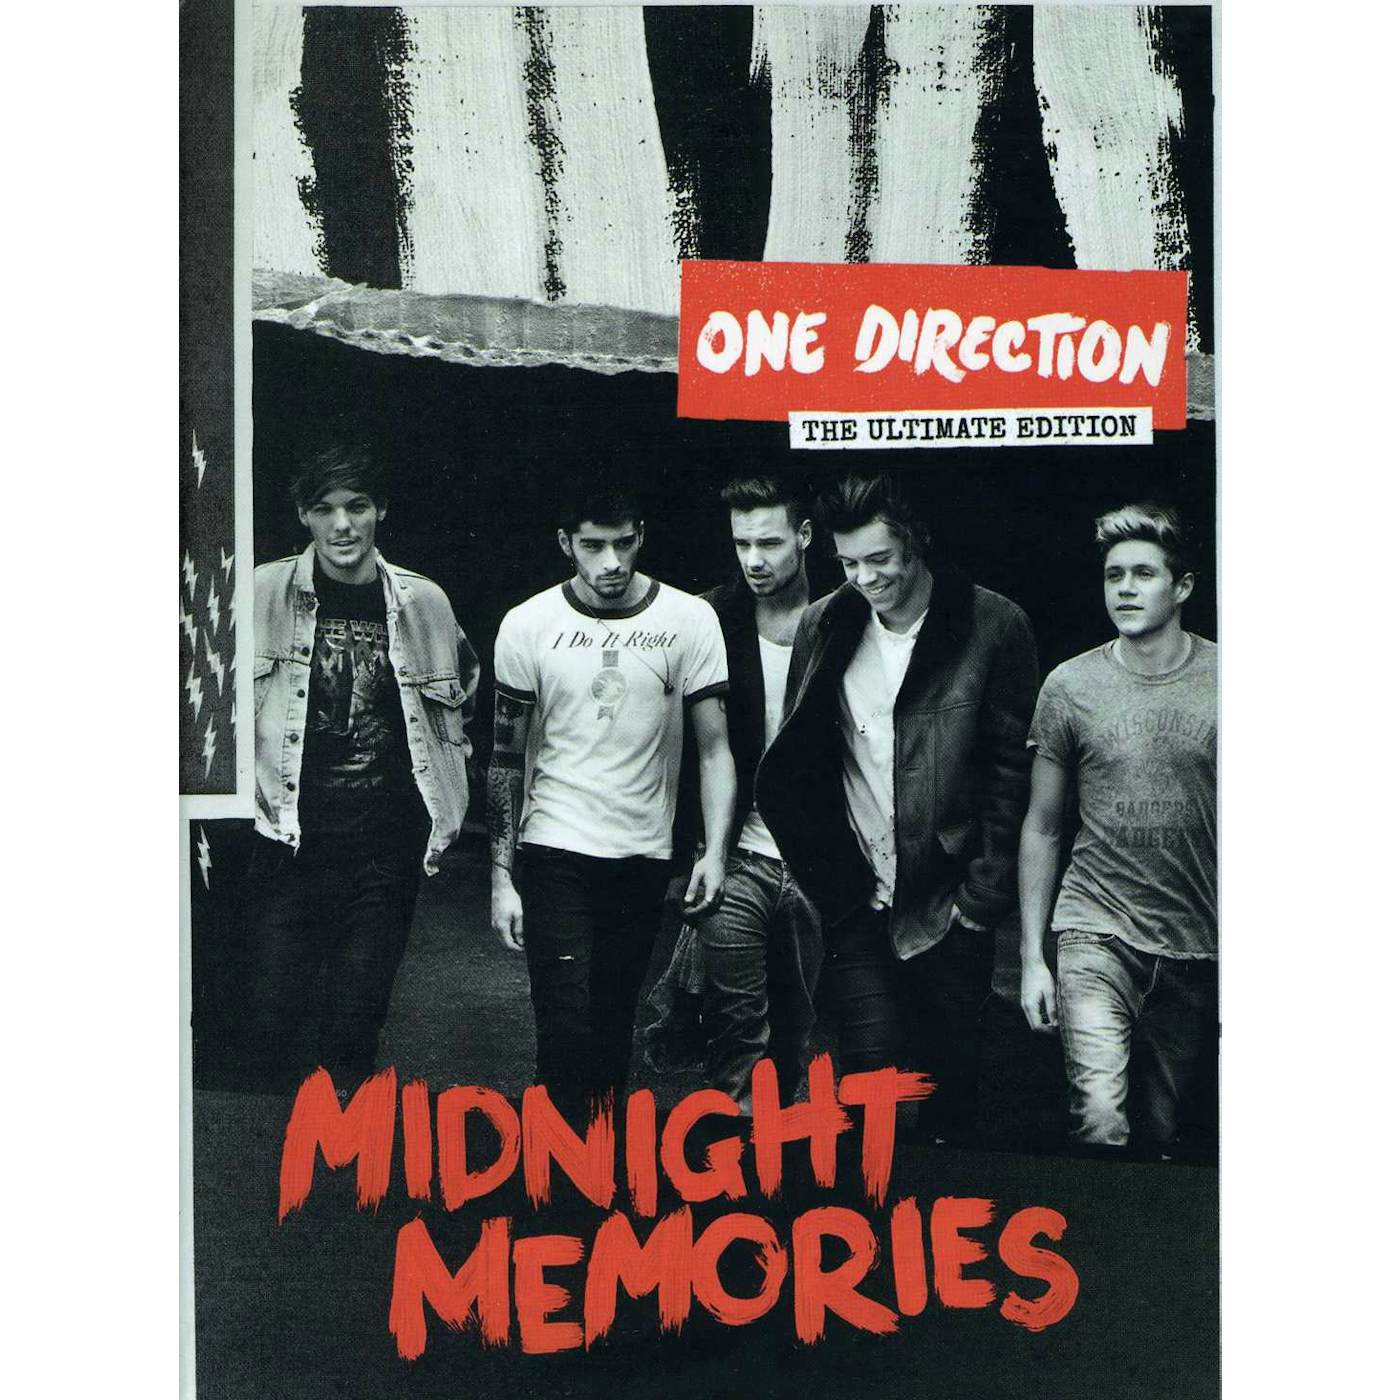 One Direction MIDNIGHT MEMORIES: INT'L DELUXE EDITION CD